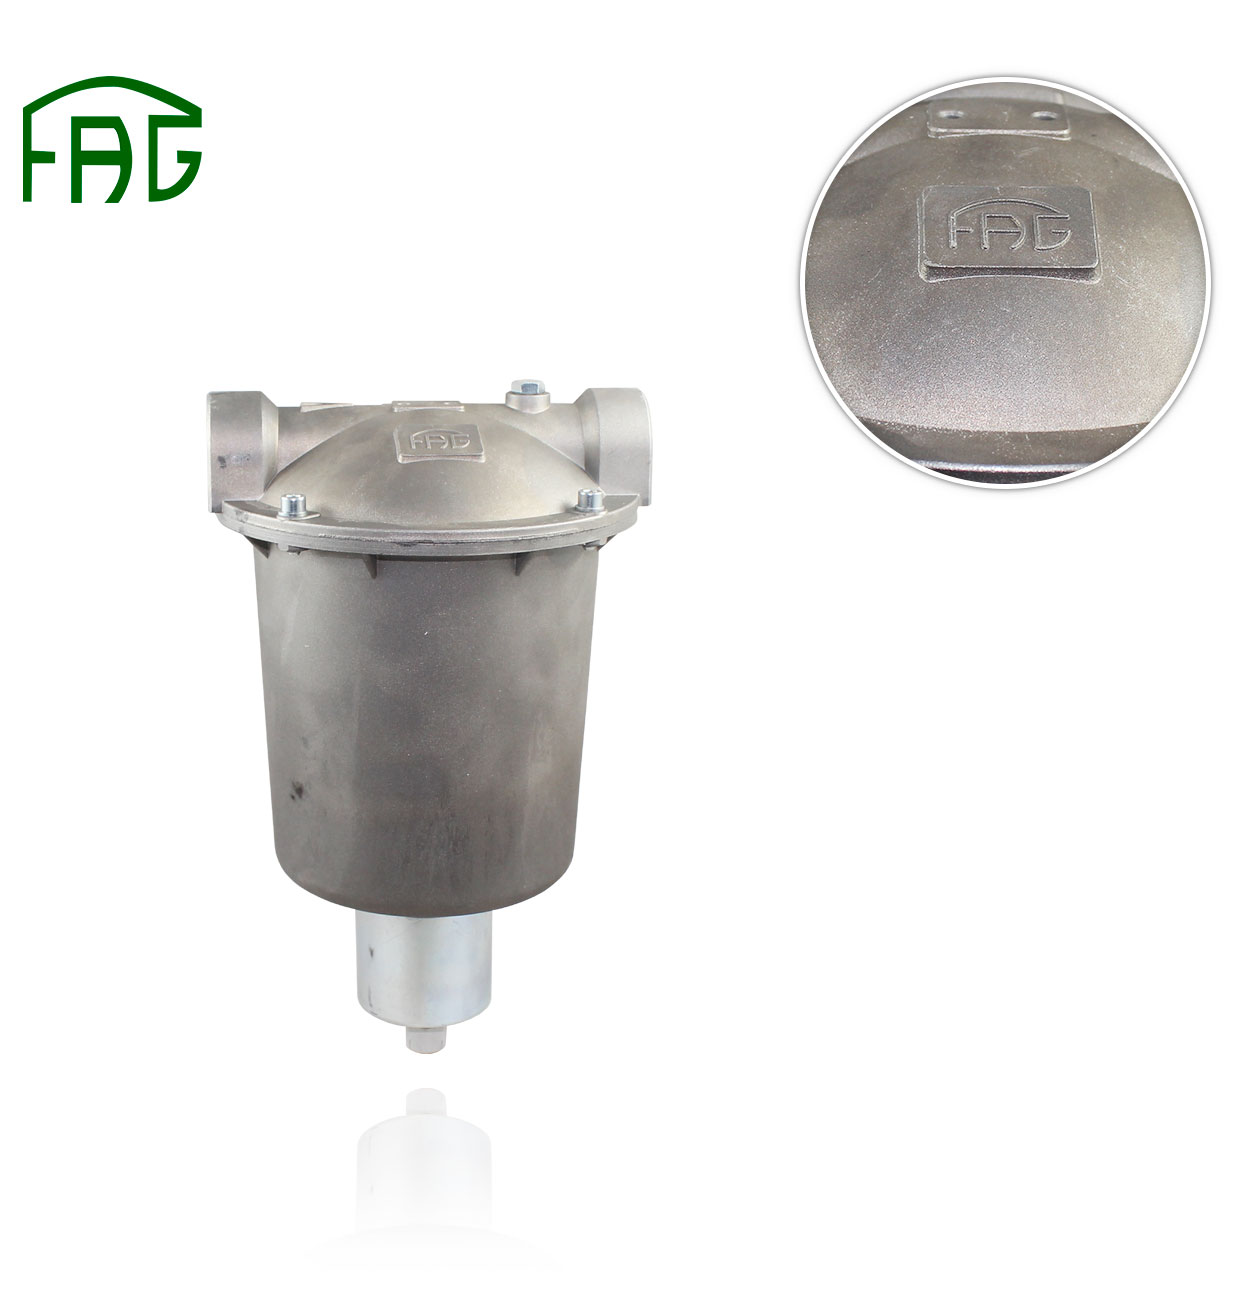 R1" 100microns FAG ALUMINIUM FILTER WITH THERMOSTAT AND 300W 220V HEATING ELEMENT